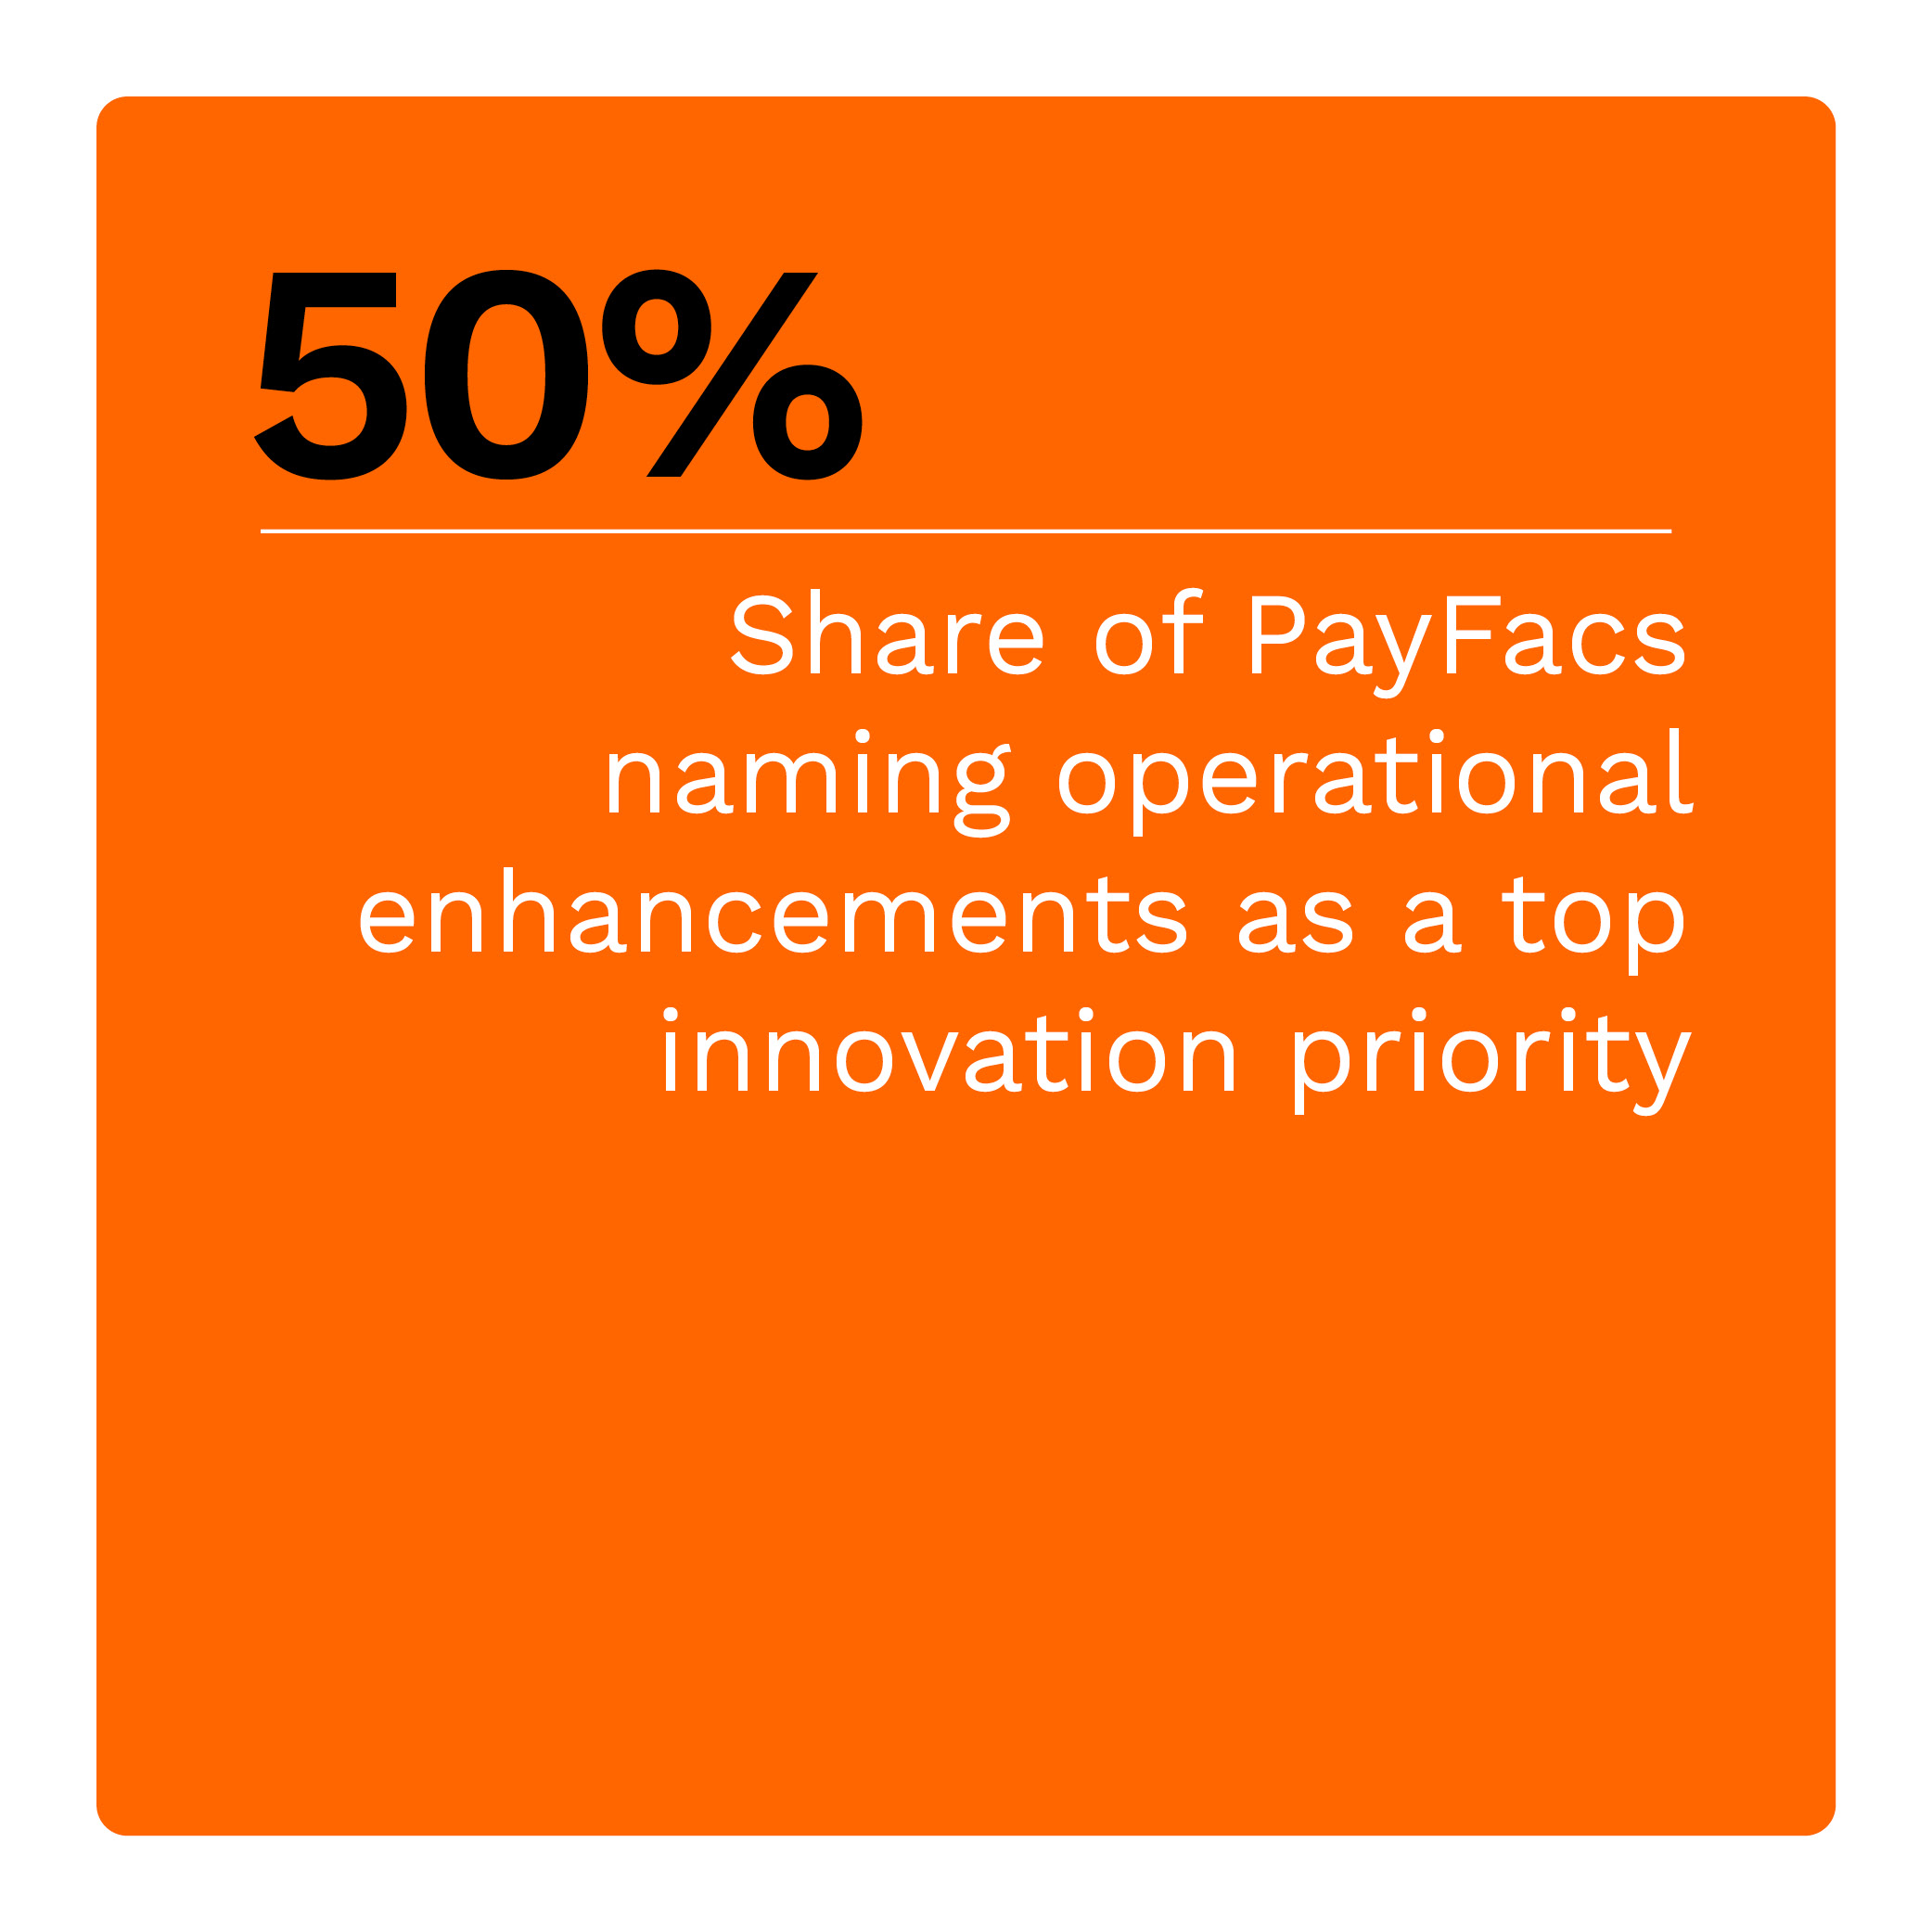  Share of PayFacs naming operational enhancements as their top innovation priority